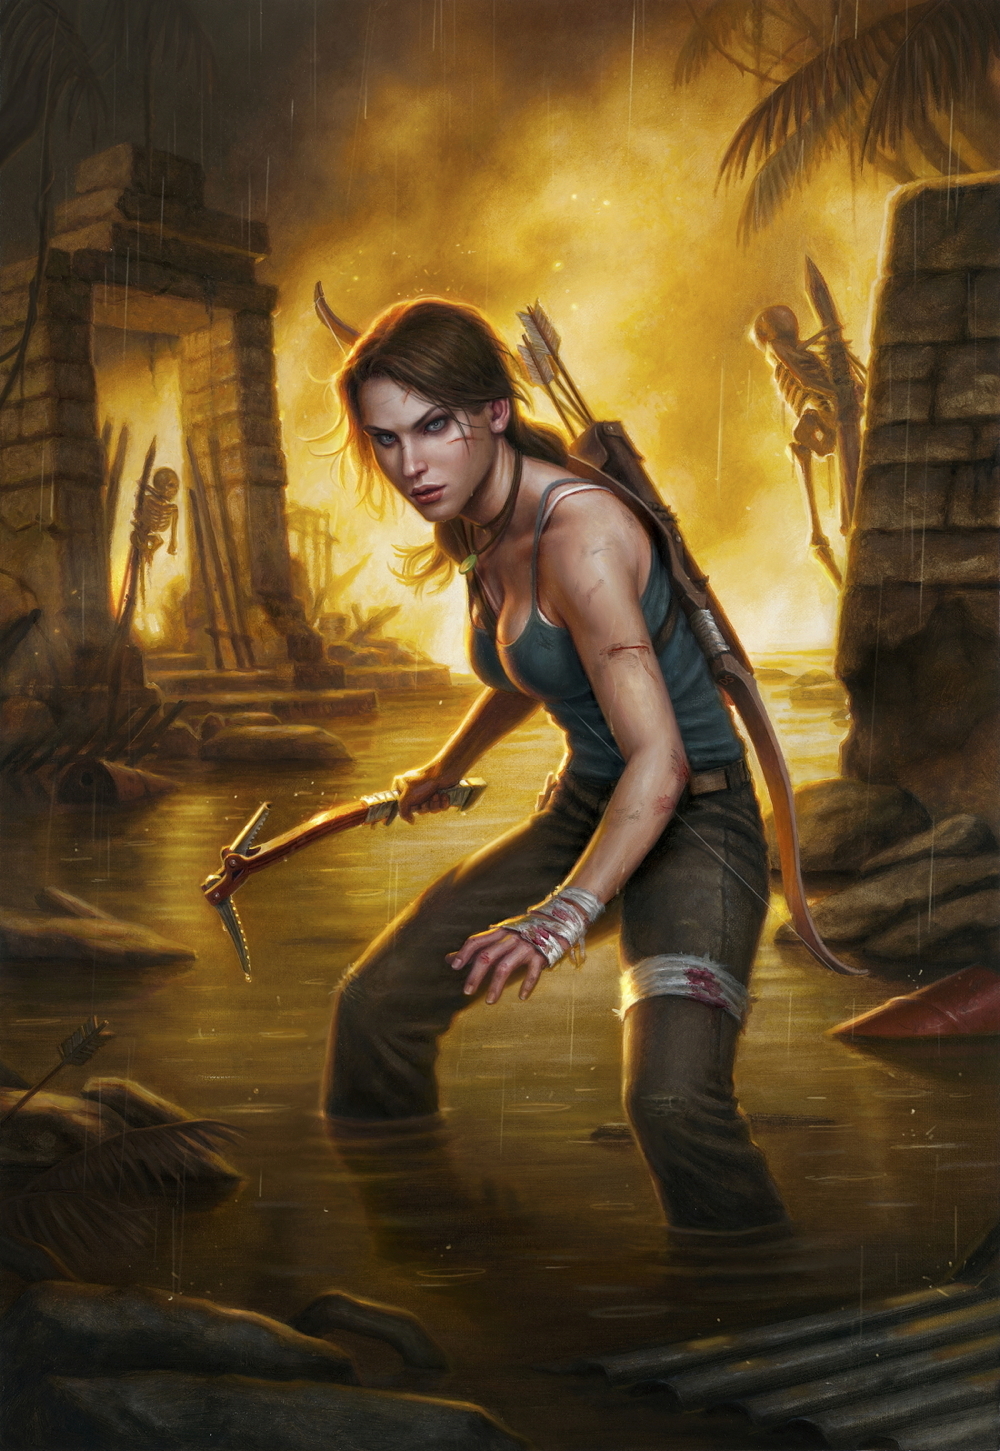 A New Tomb Raider Comic Shows What’s Next For Lara Croft After Hit Game